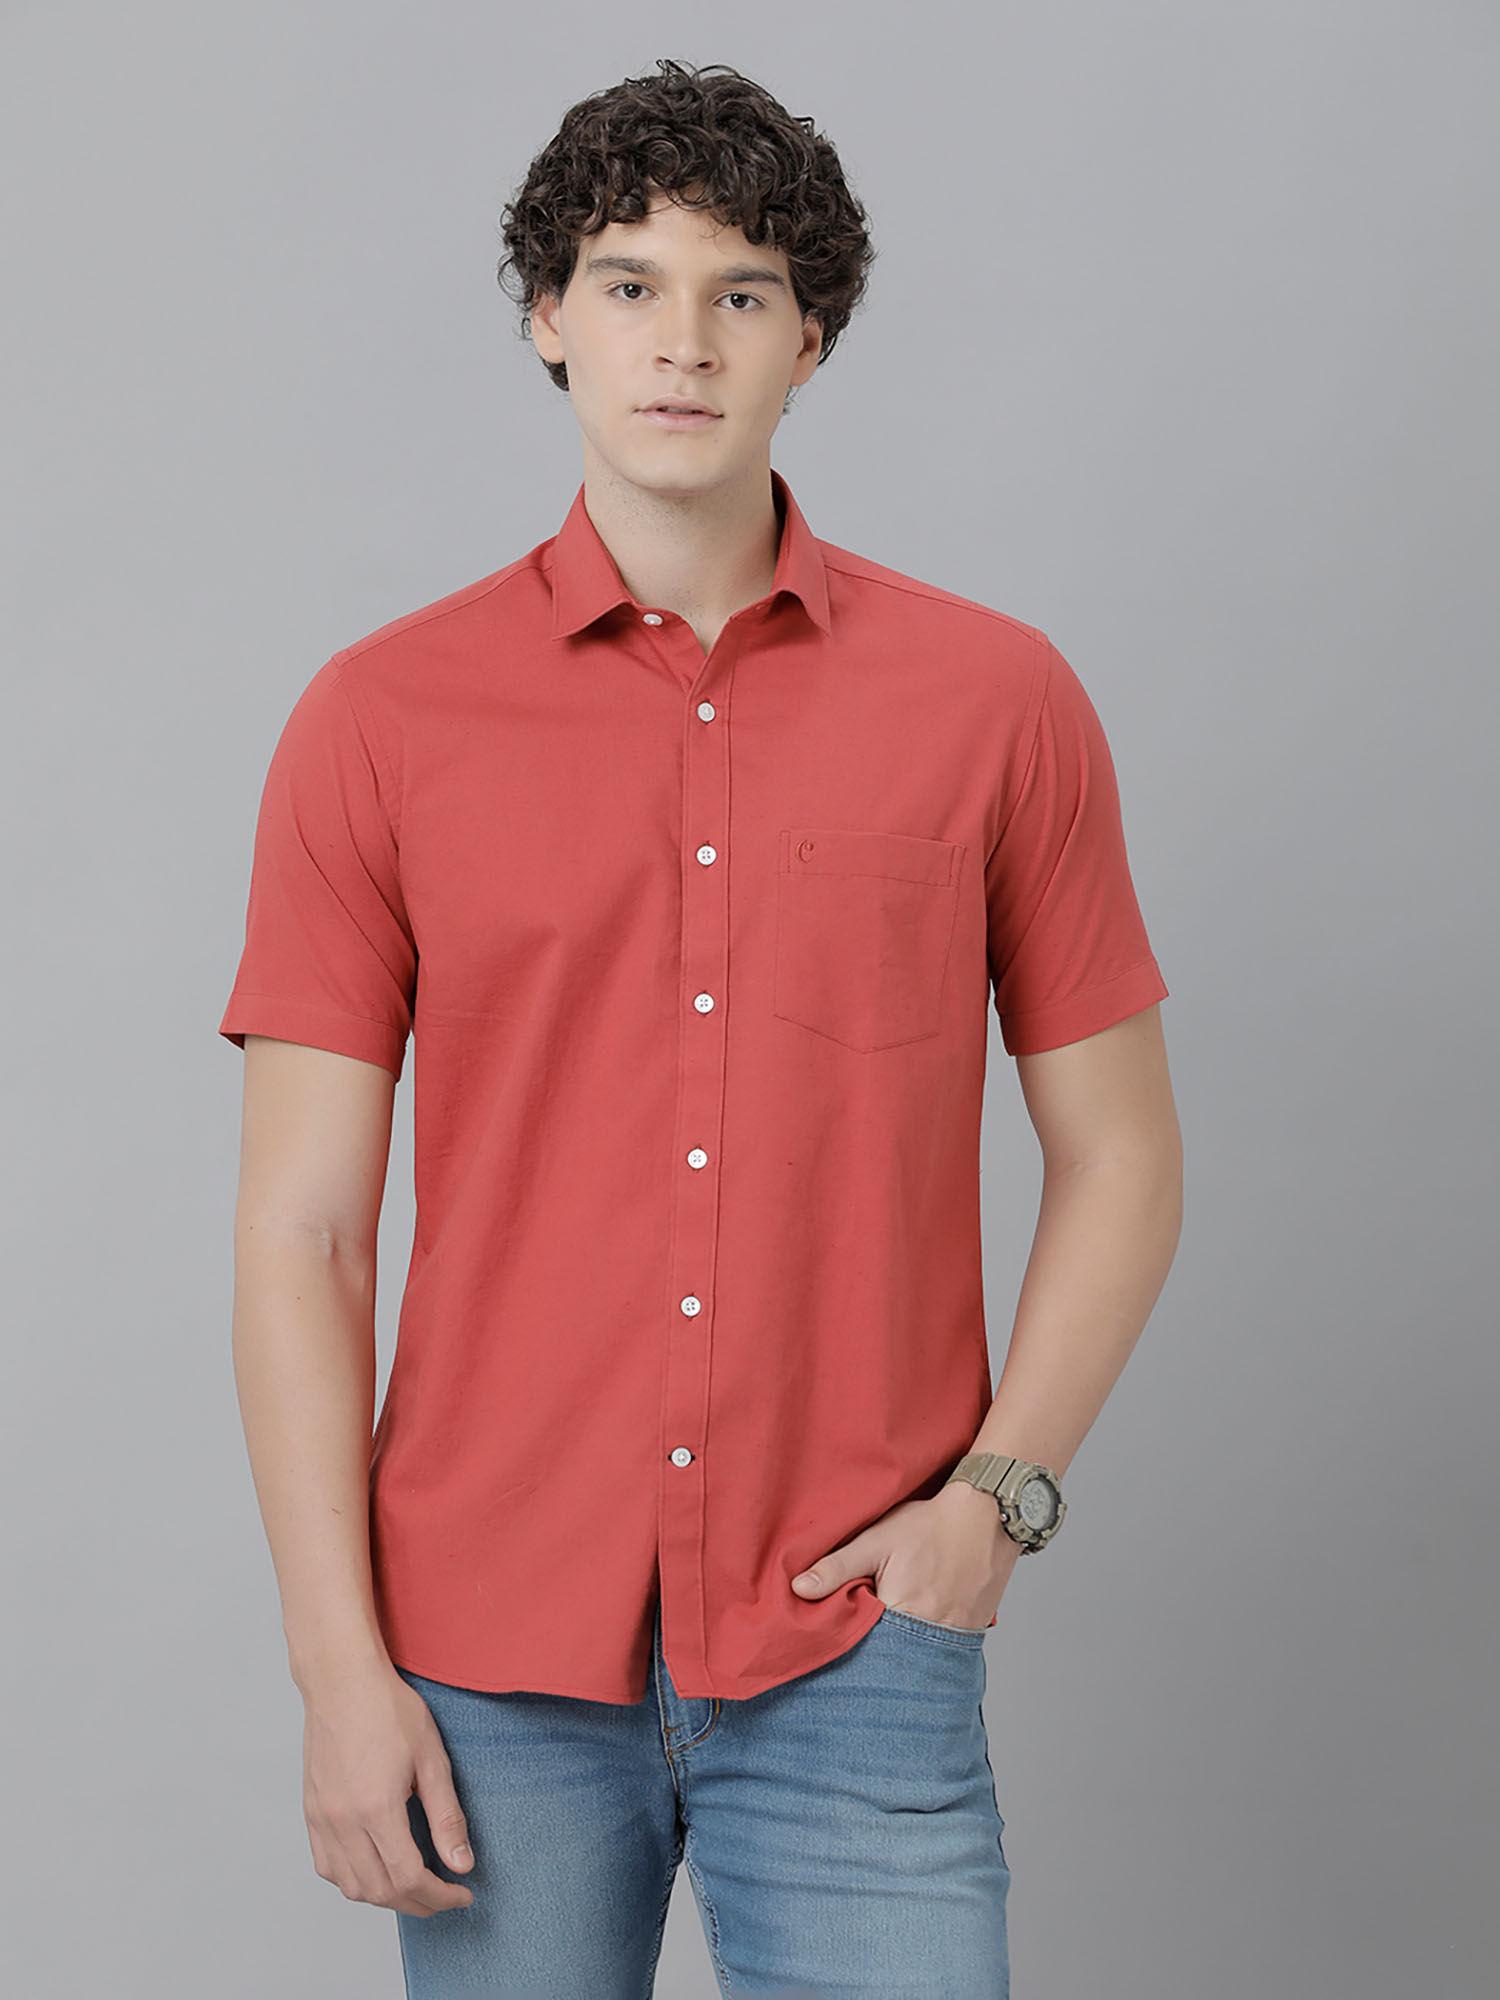 men's cotton linen red solid slim fit half sleeve casual shirt